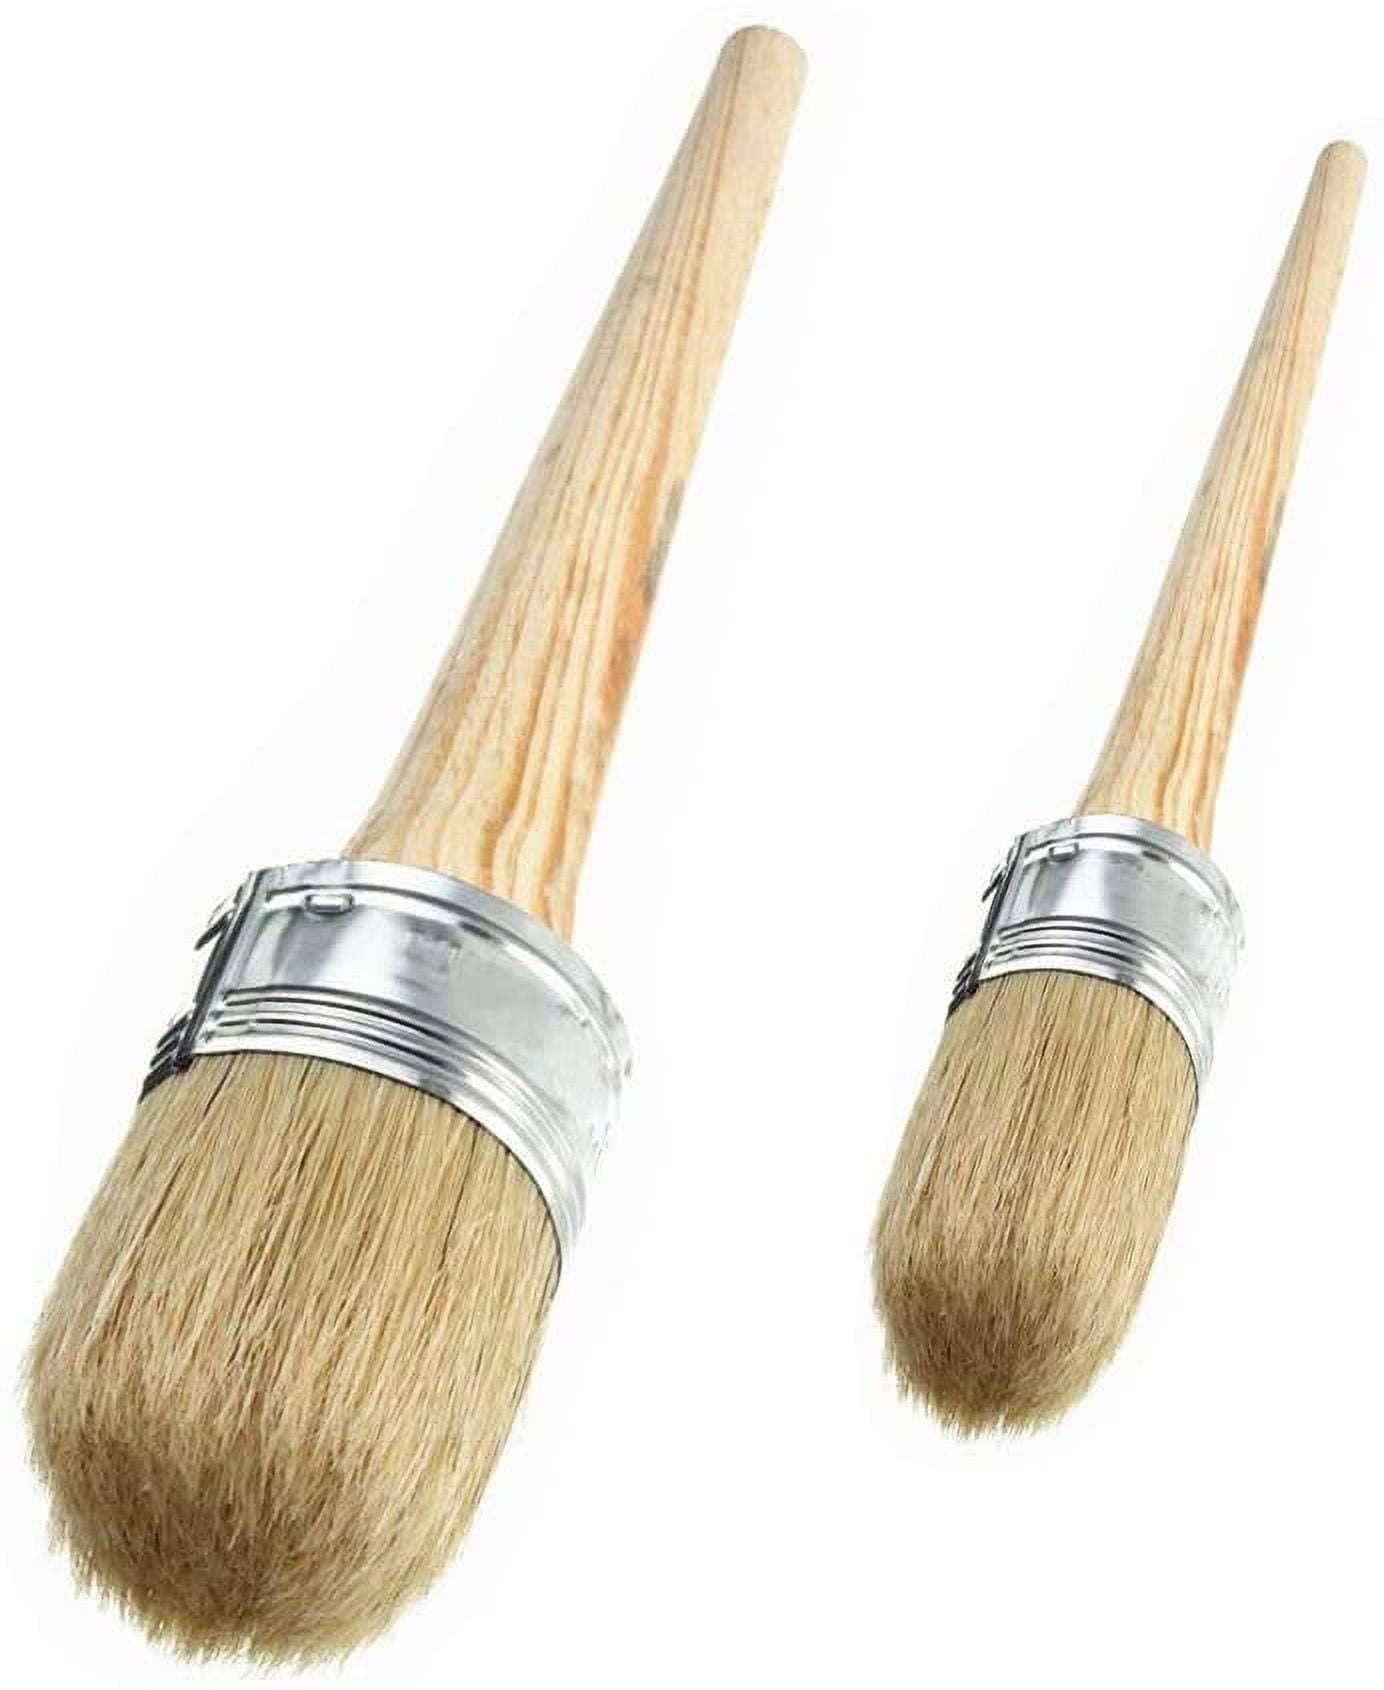 2 PCS Chalk Paint Wax Brush Set – （25mm / 50mm) Natural Bristle Round Wax  Brush for Painting or Waxing Furniture Home Décor 